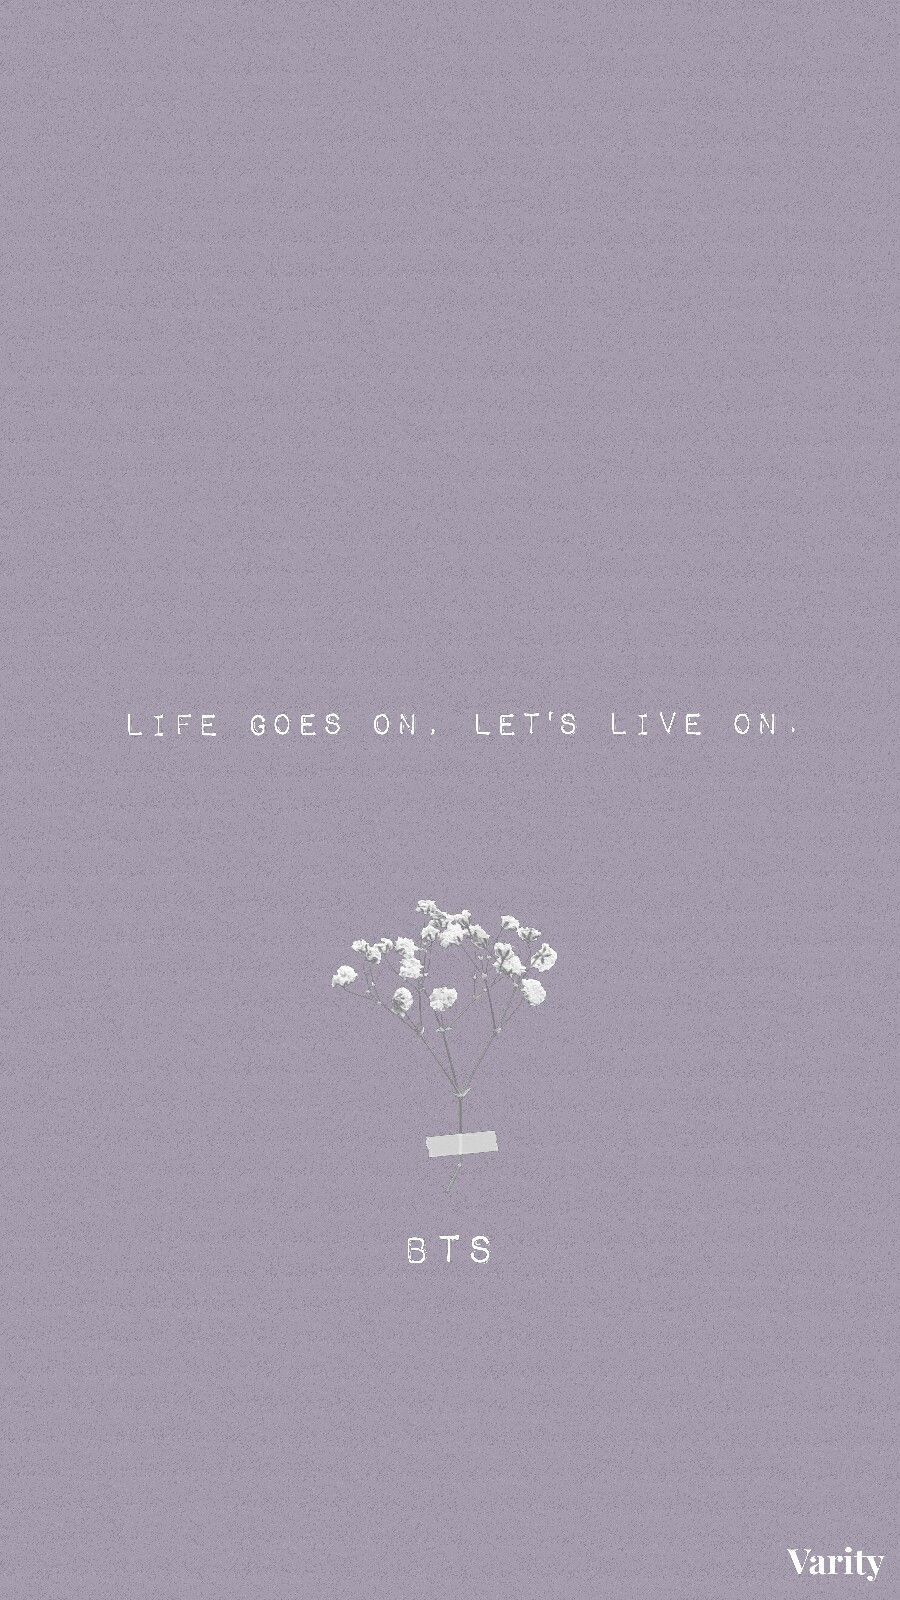 Bts Life Goes On Wallpapers